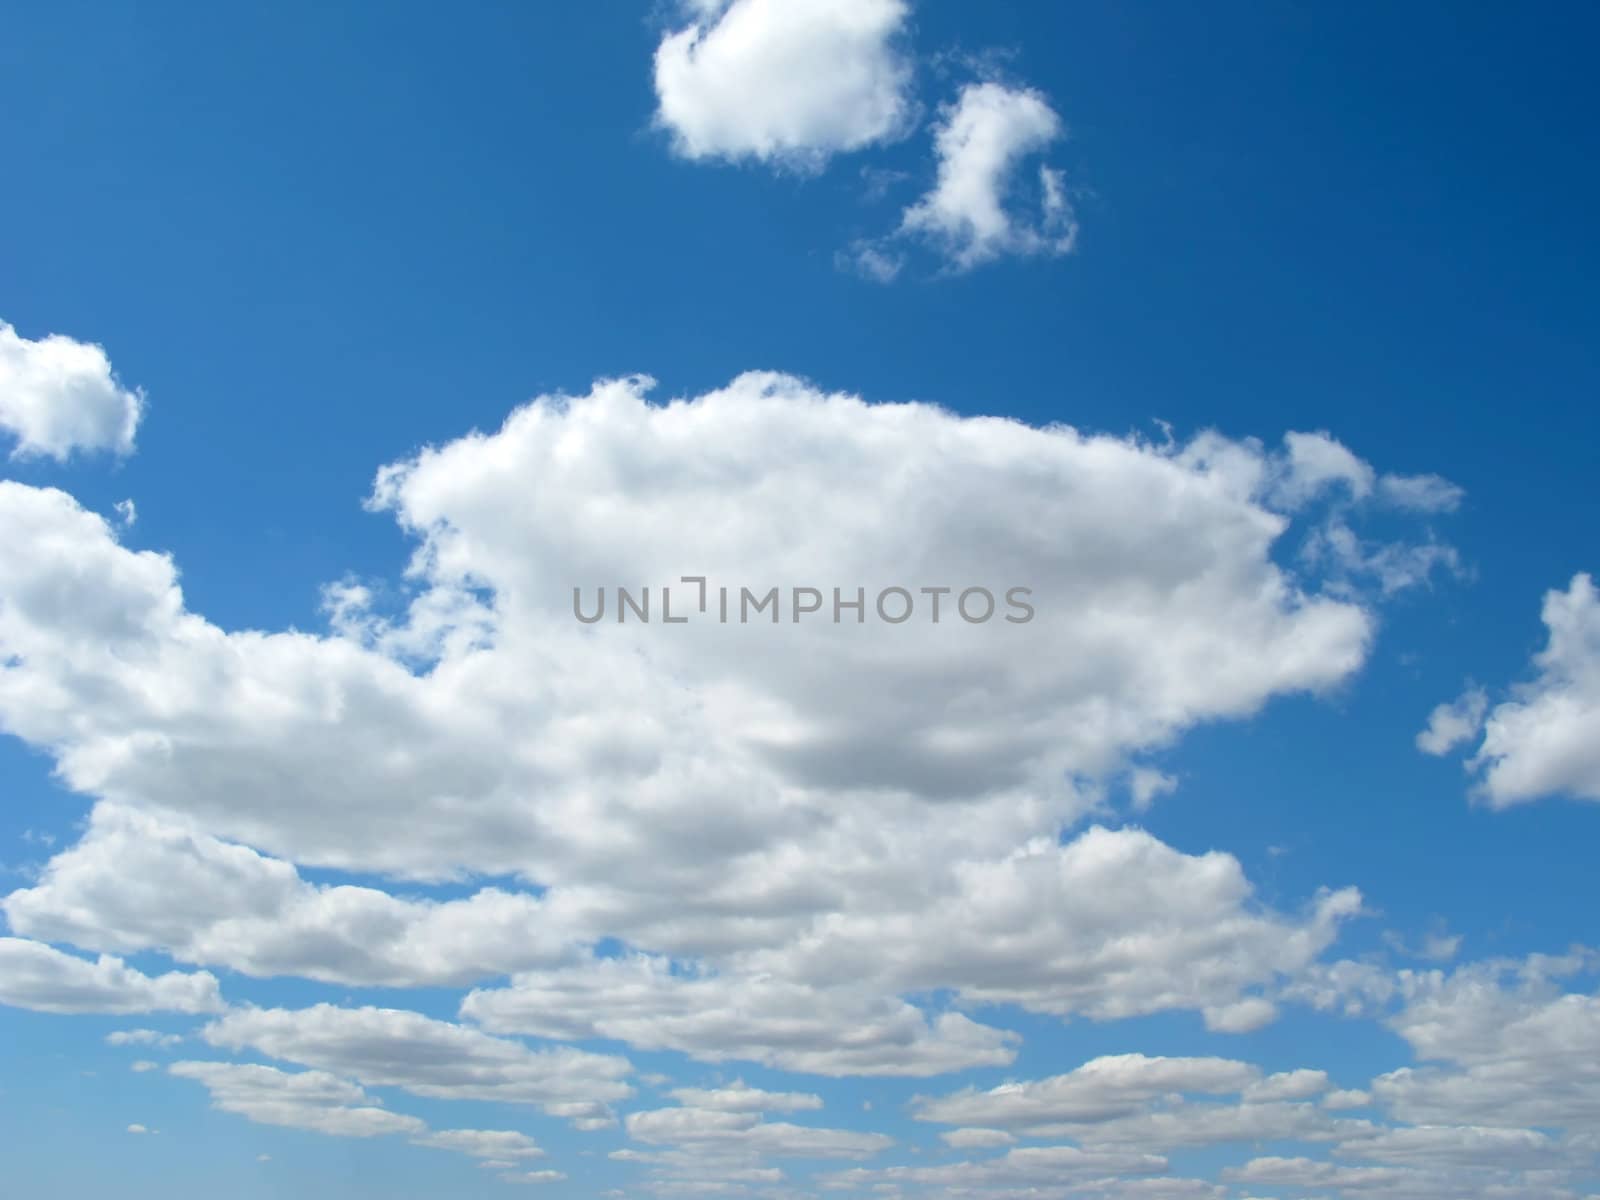 The beautiful blue sky and white clouds